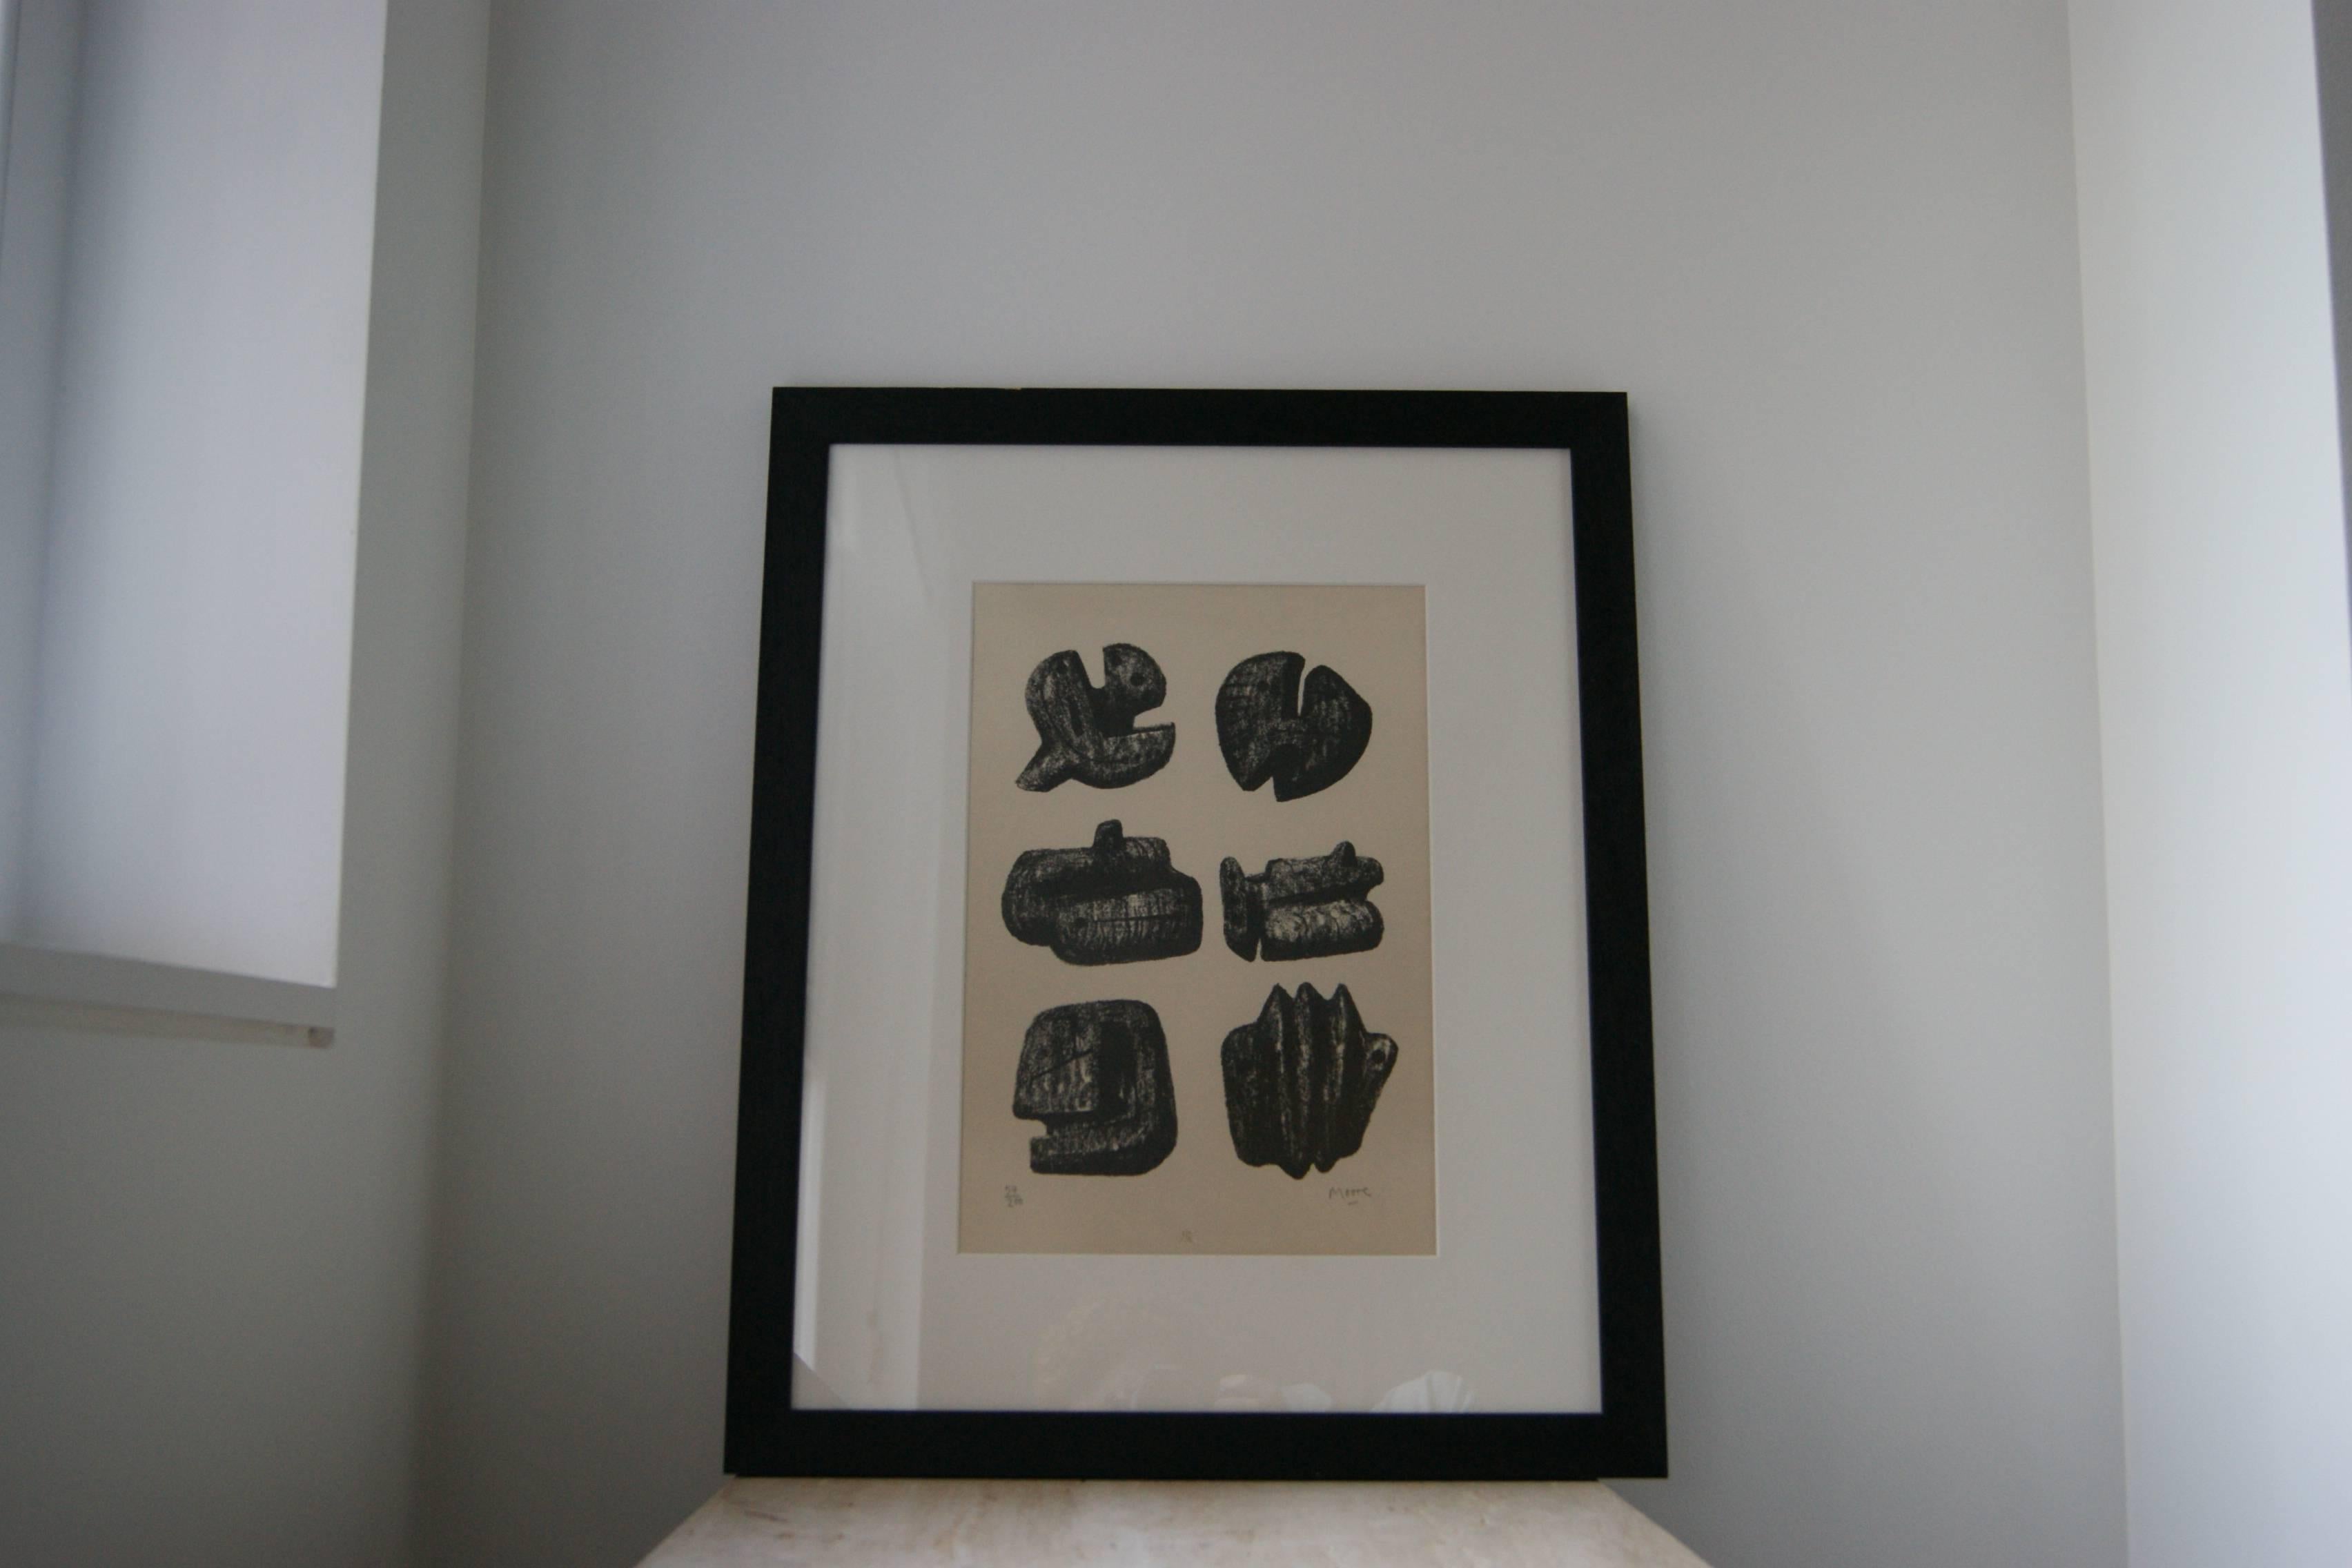 'Six Stones’. Lithograph from 1973. Edition of 200 signed by Henry Moore. Also held in Tate Collection. The print is mounted with card displaying a line drawing of an aircraft interior. It is believed this relates to the Days’ work with BOAC during